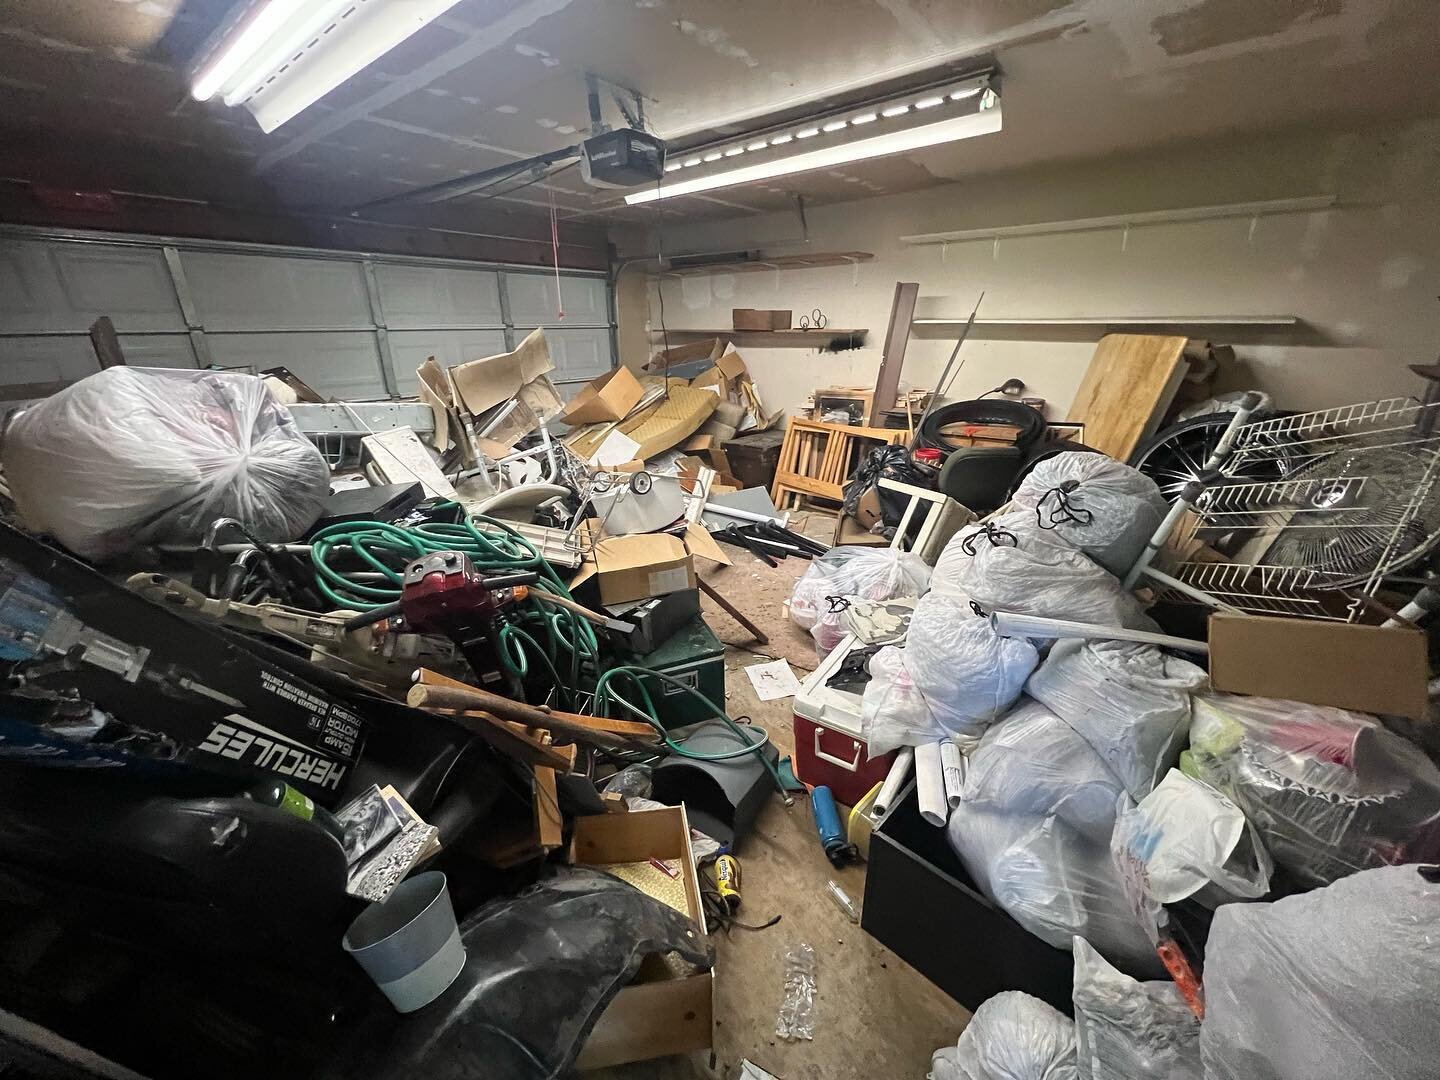 Locally owned without the high prices of franchise companies. No fancy marketing, no fancy wraps, just clean trucks, hard work, and affordable prices. 

Two crews completed this Eviction clear out in Pittsburg  in one afternoon. Hauled, swept, and du